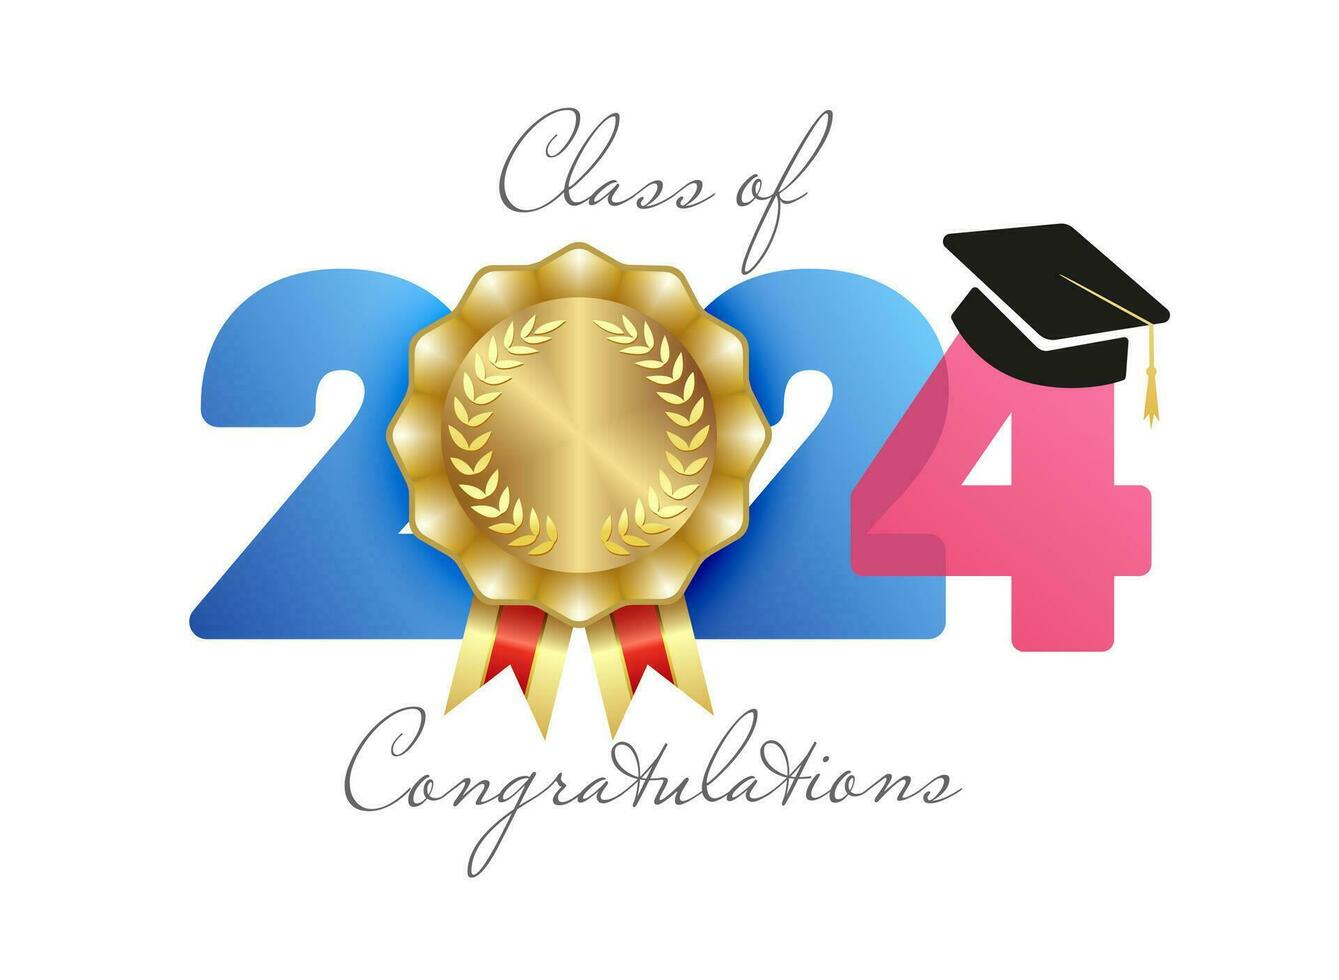 Class of 2024 congrats graphic banner. Educational symbol. Congratulations graduates number icon with golden medal. Gold rosette design. Creative sign with graduating cap. Diploma element. Badge idea. vector